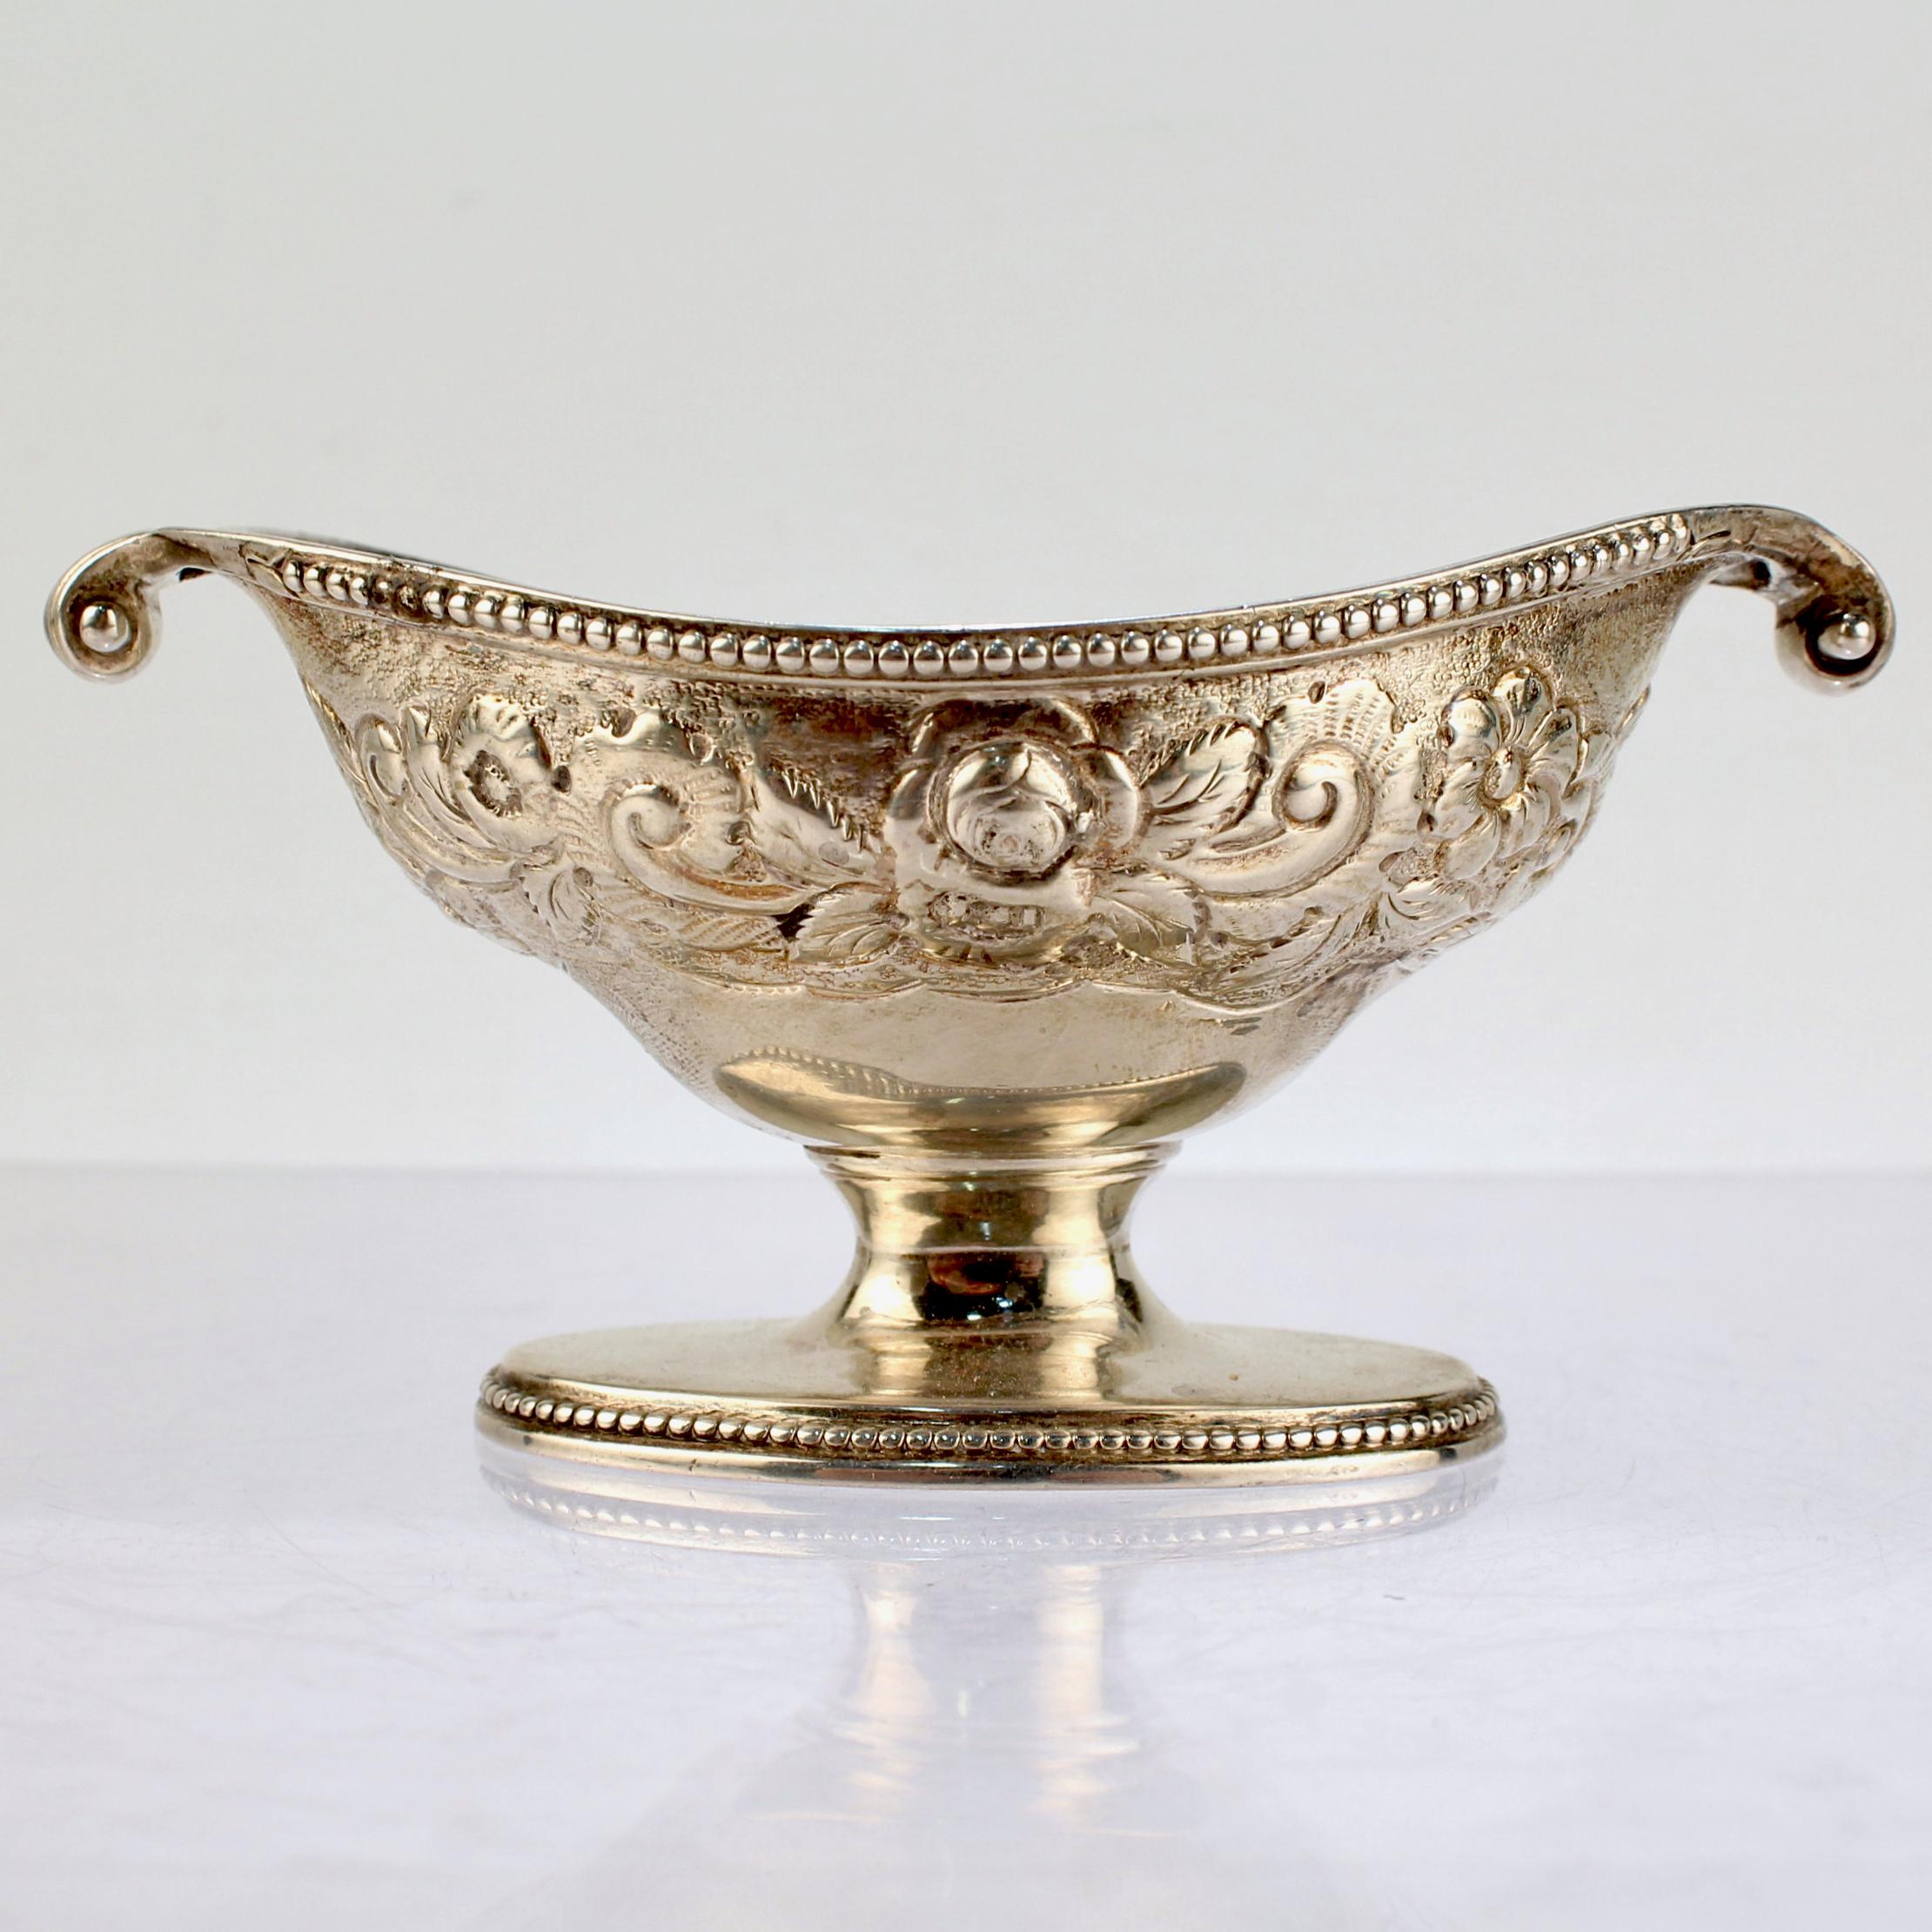 Women's or Men's Antique 18th C George III Sterling Silver Salt Cellar by Robert Hennell I For Sale